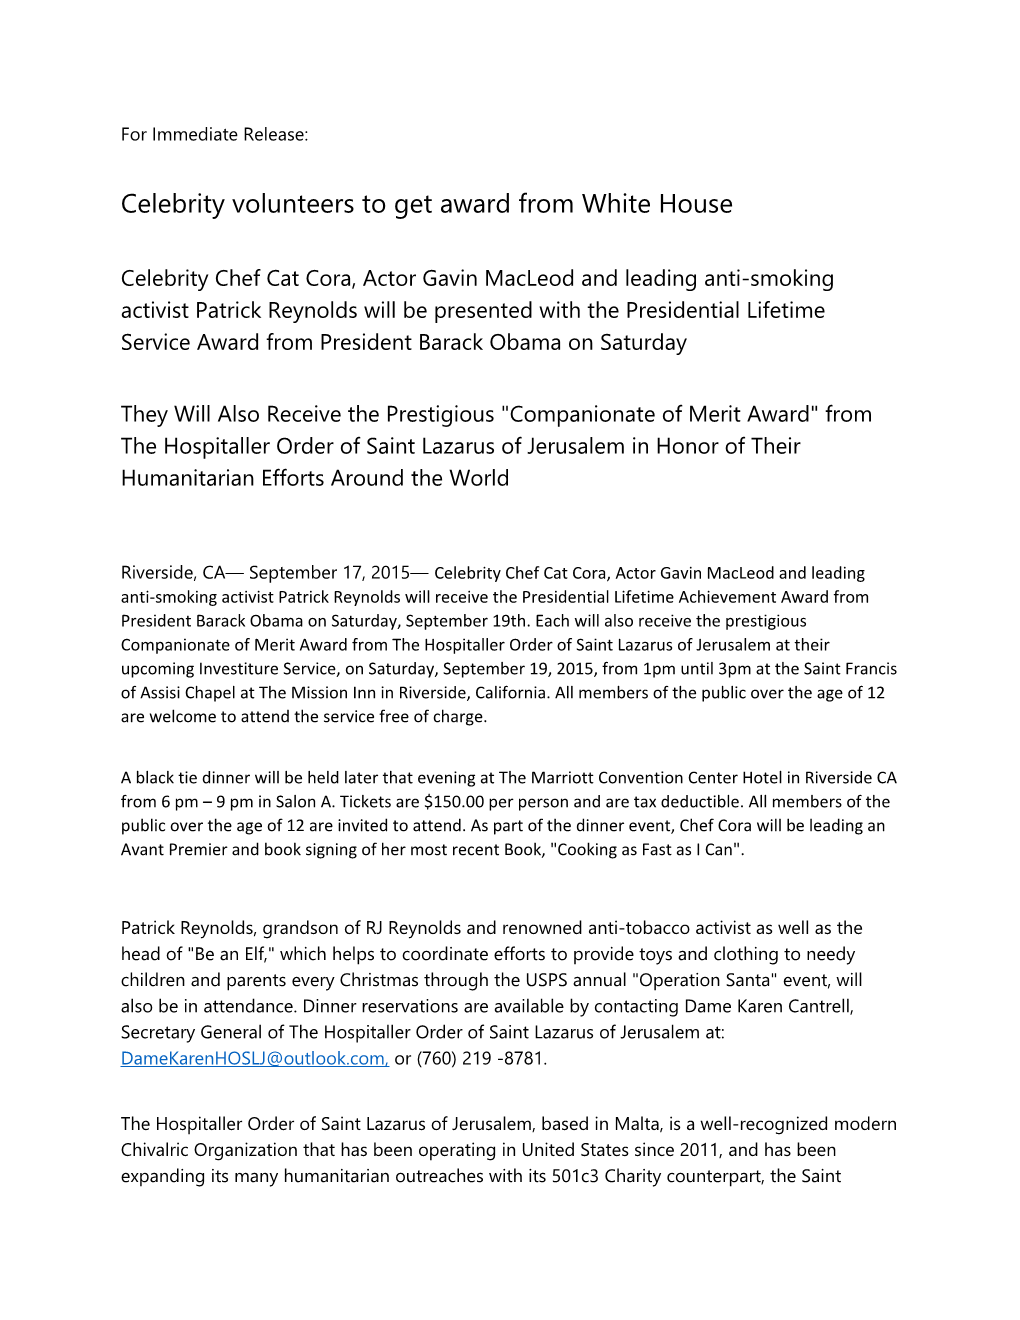 Celebrity Volunteers to Get Award from White House